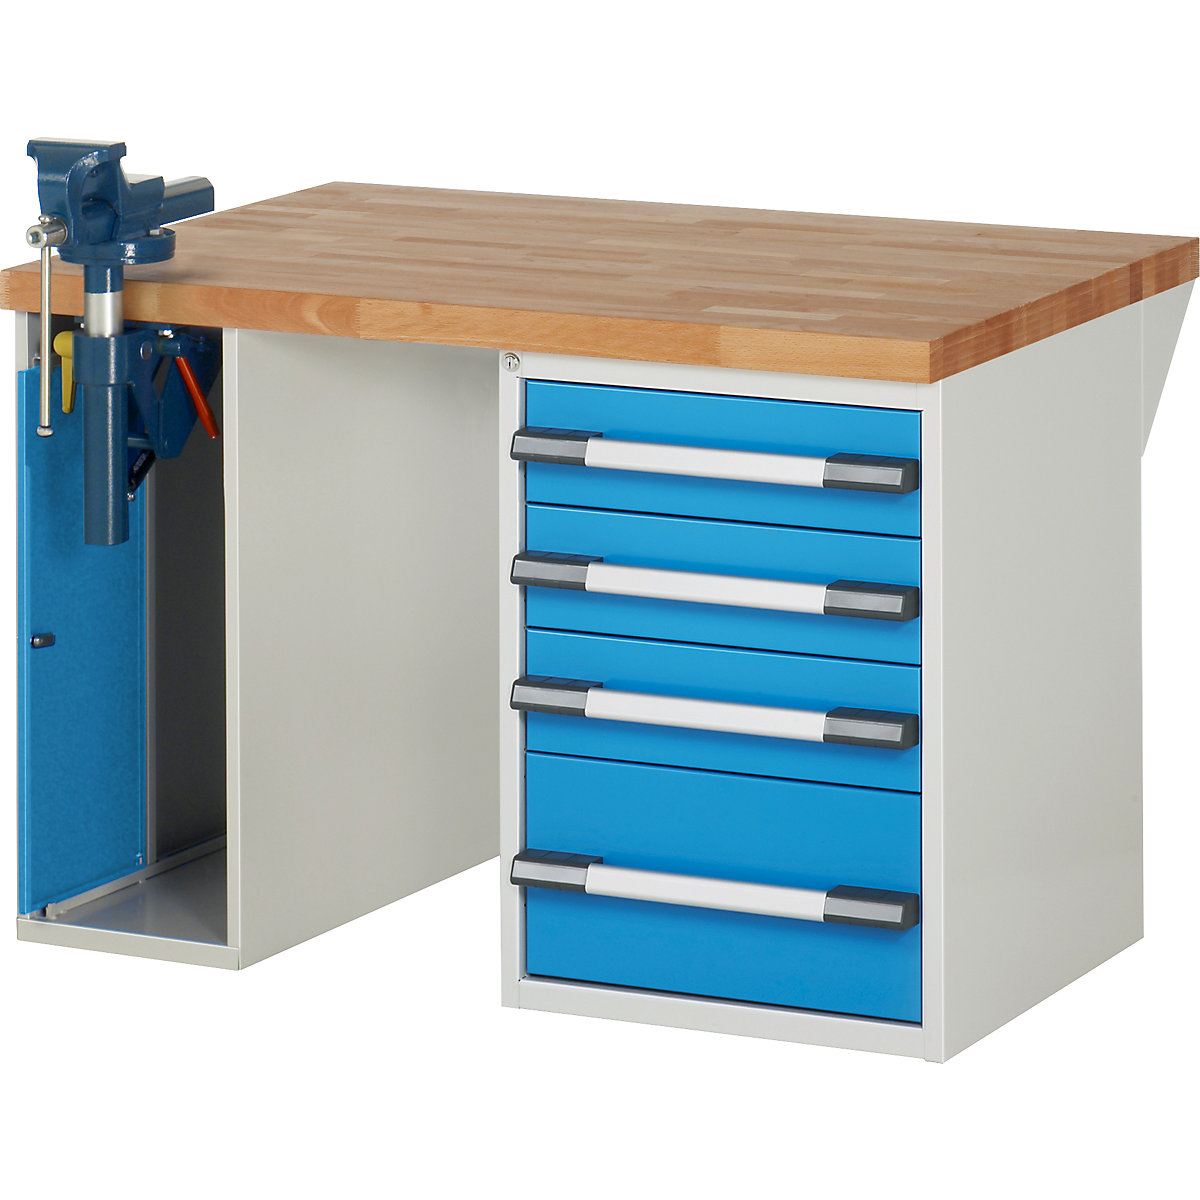 Workbench, Series 7 modular system – eurokraft pro, 1 cupboard, 1 fixed pedestal with 4 drawers, WxD 1250 x 900 mm-5